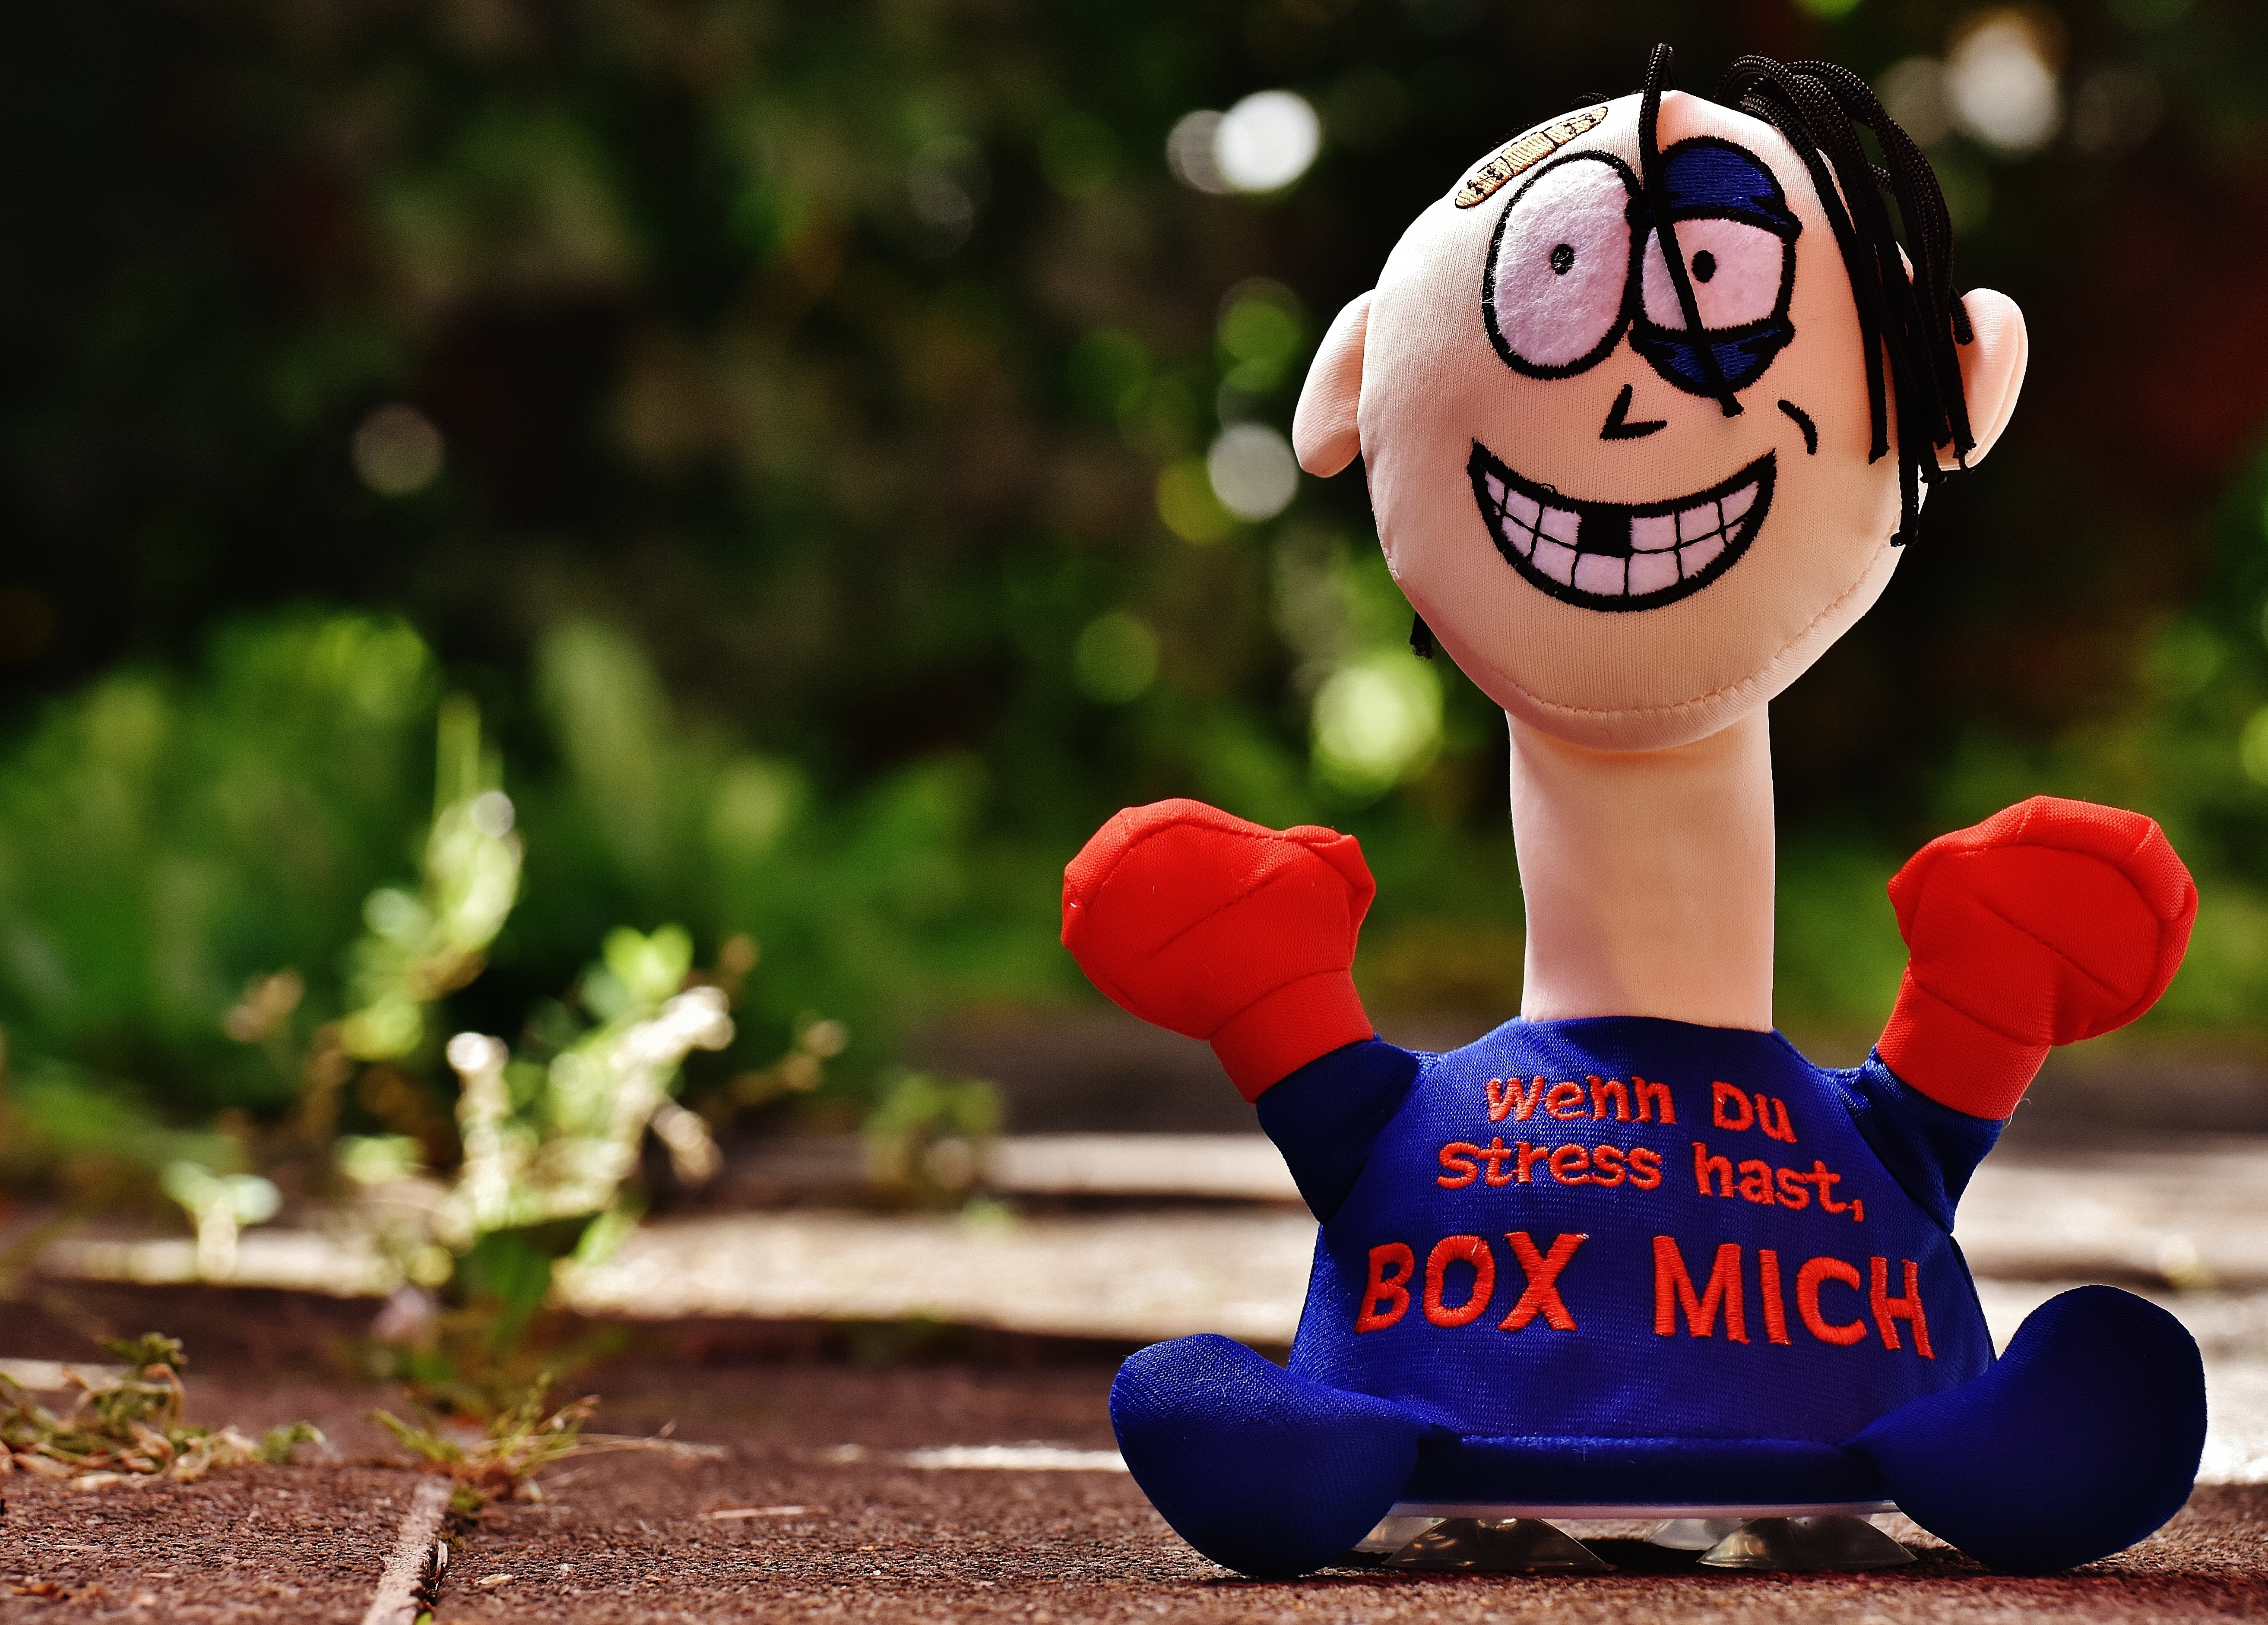 blue and red box mich plush toy